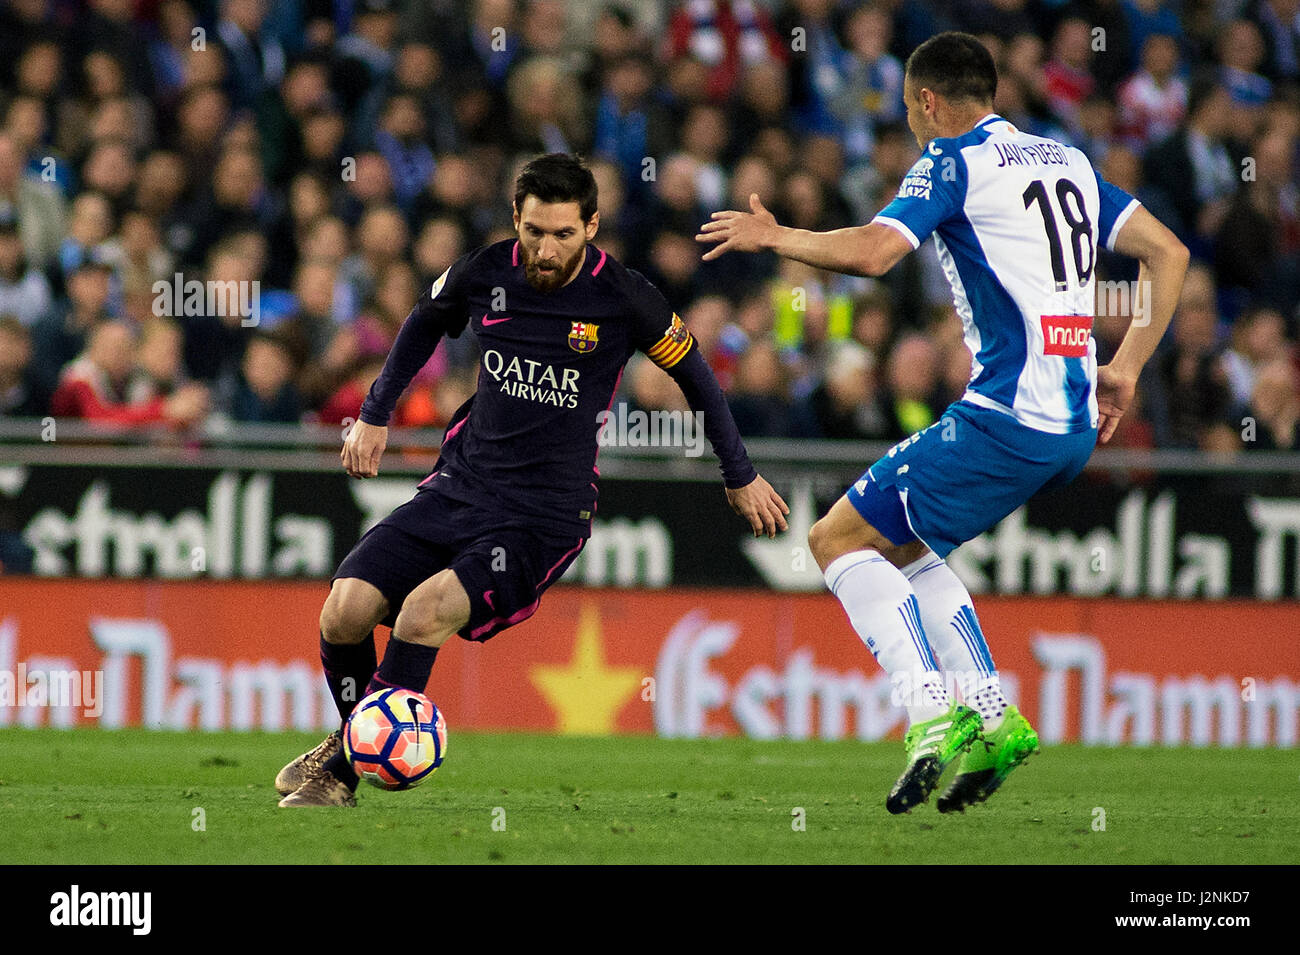 Barcelona, Spain. 29th Apr, 2017. Barcelona's Lionel Messi(L) vies with Espanyol's Javi Fuego during the Spanish first division (La Liga) soccer match between RCD Espanyol and FC Barcelona at RCDE Stadium in Barcelona, Spain, April 29, 2017. Barcelona won 3-0. Credit: Lino De Vallier/Xinhua/Alamy Live News Stock Photo